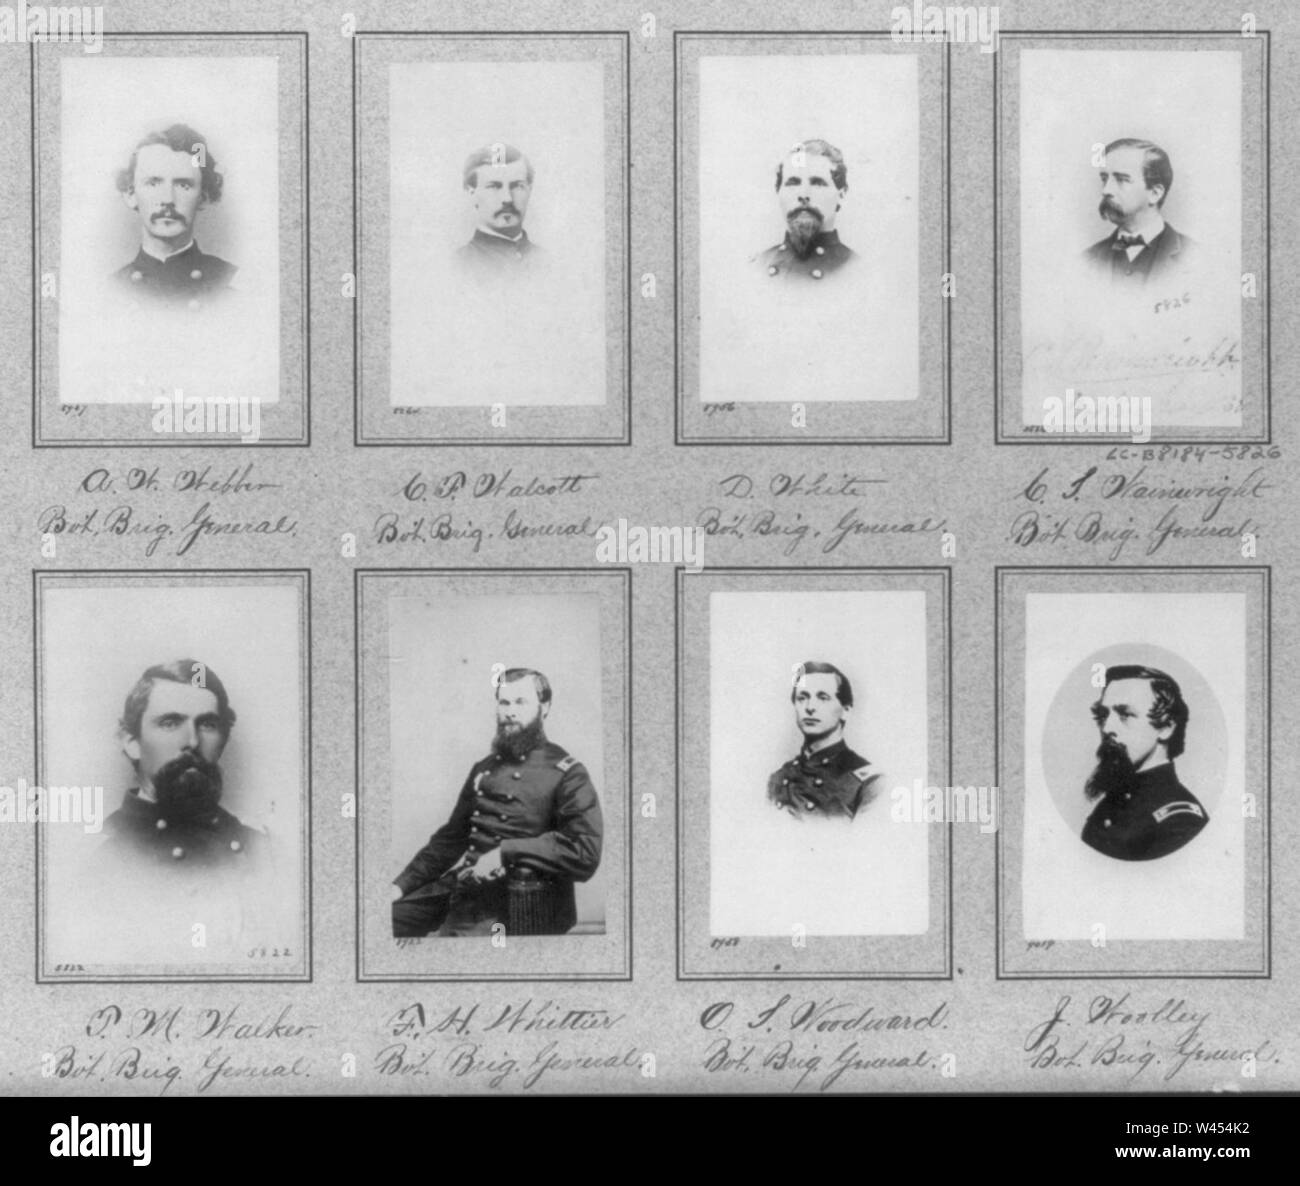 Composite of 7 busts and 1 half-length photos of Brig. Generals A.W. Webber, C.F. Walcott, D. White, C. Wainwright, T.M. Walker, F.H. Whittier, O. Woodward, J. Woolley Stock Photo